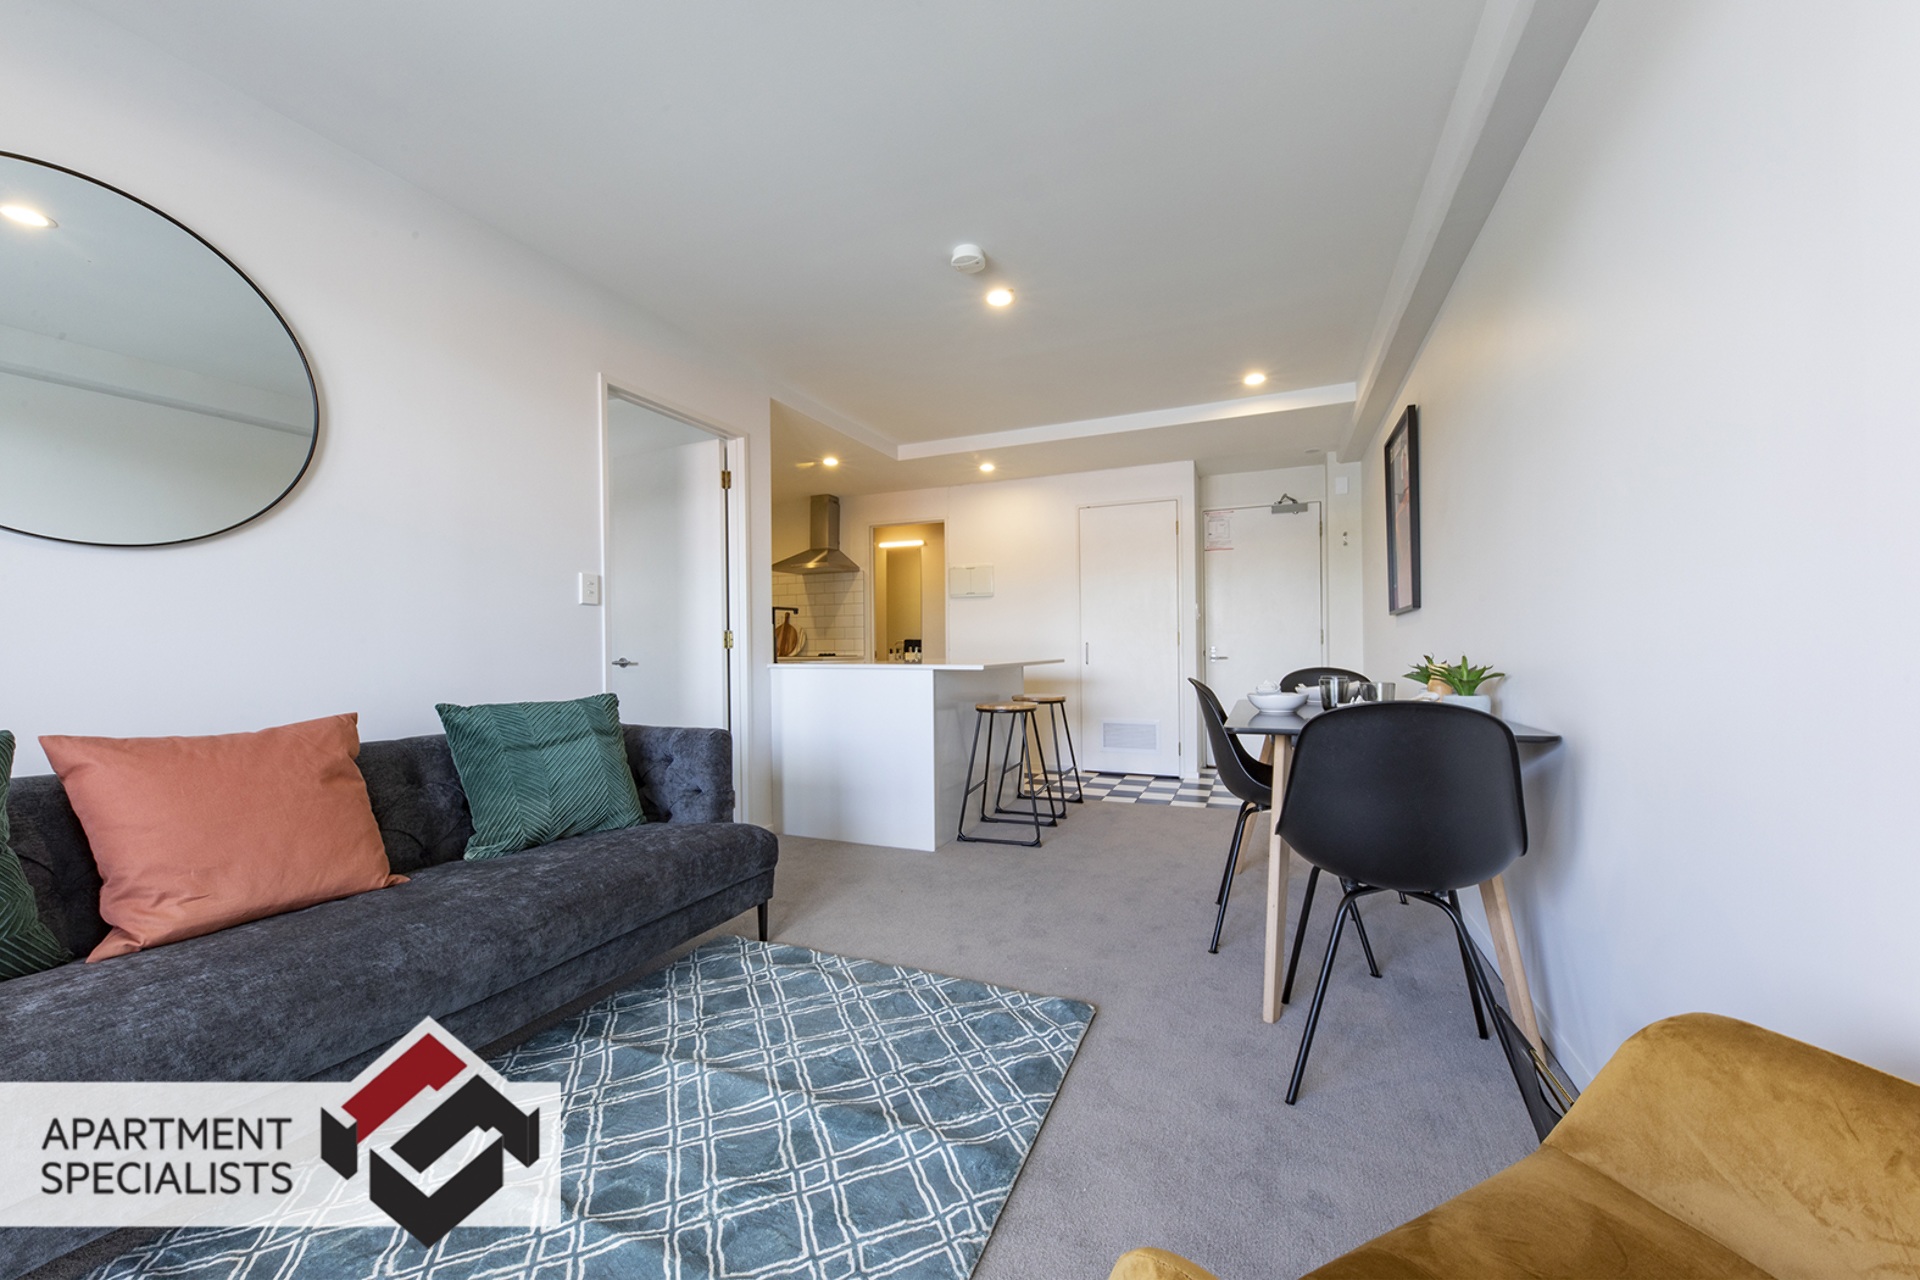 1 | 250 Richmond Road, Ponsonby | Apartment Specialists